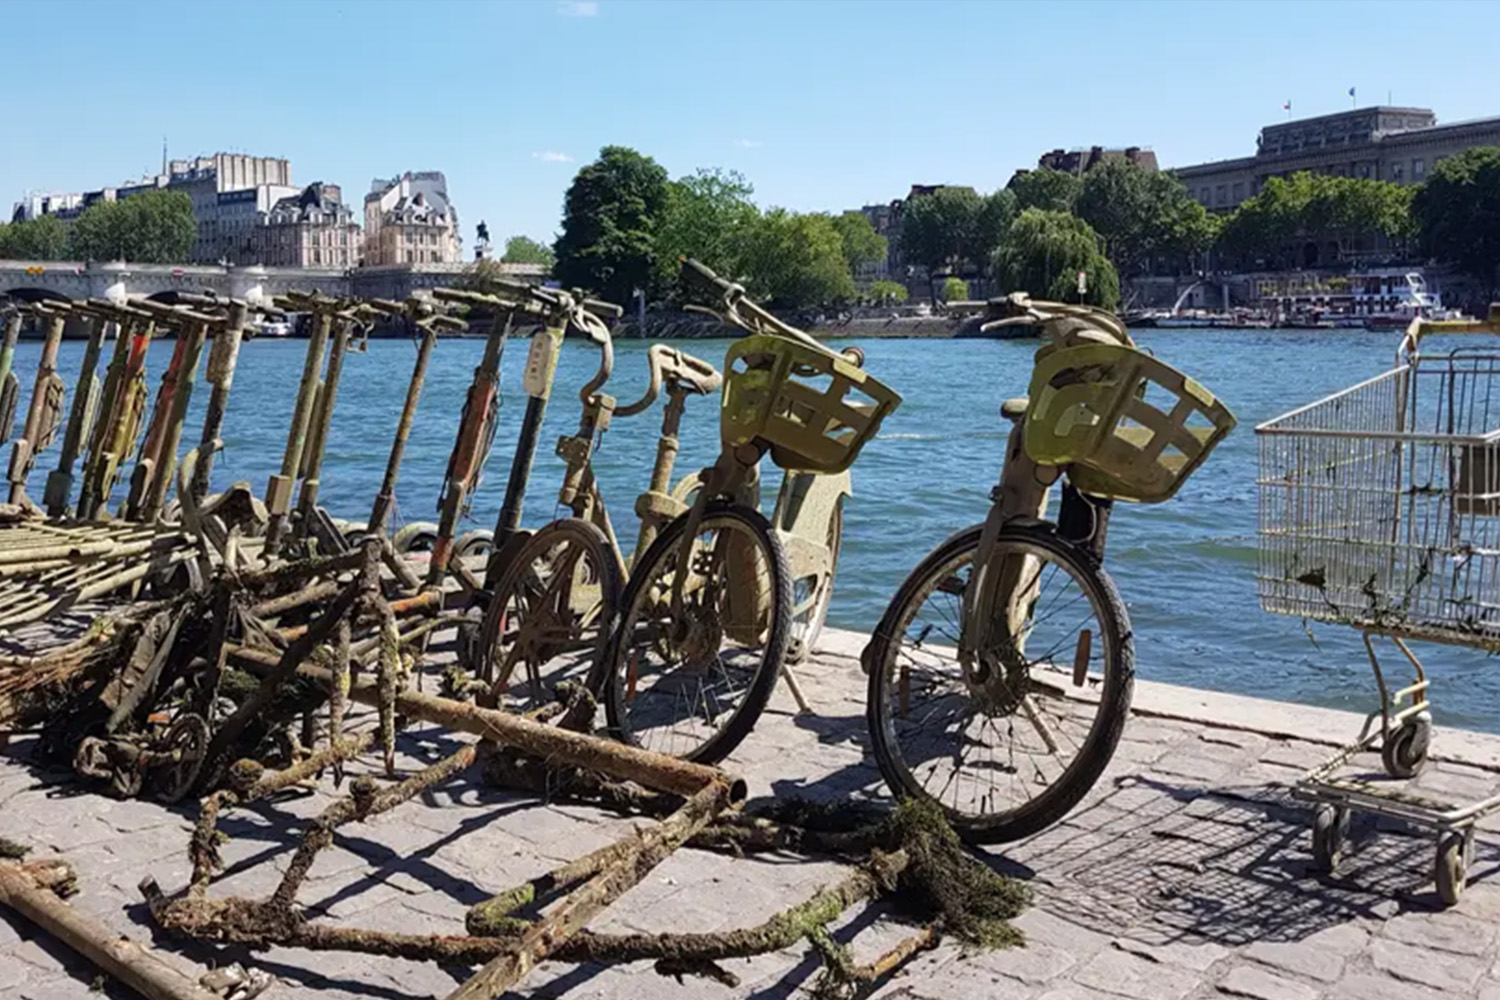 The aftermath of a magnetic fishing trip on the River Seine. Credit: <a href='https://www.businessinsider.com/french-startup-clean-the-seine-river-e-scooter-at-time-2019-8'>Guppy</a>